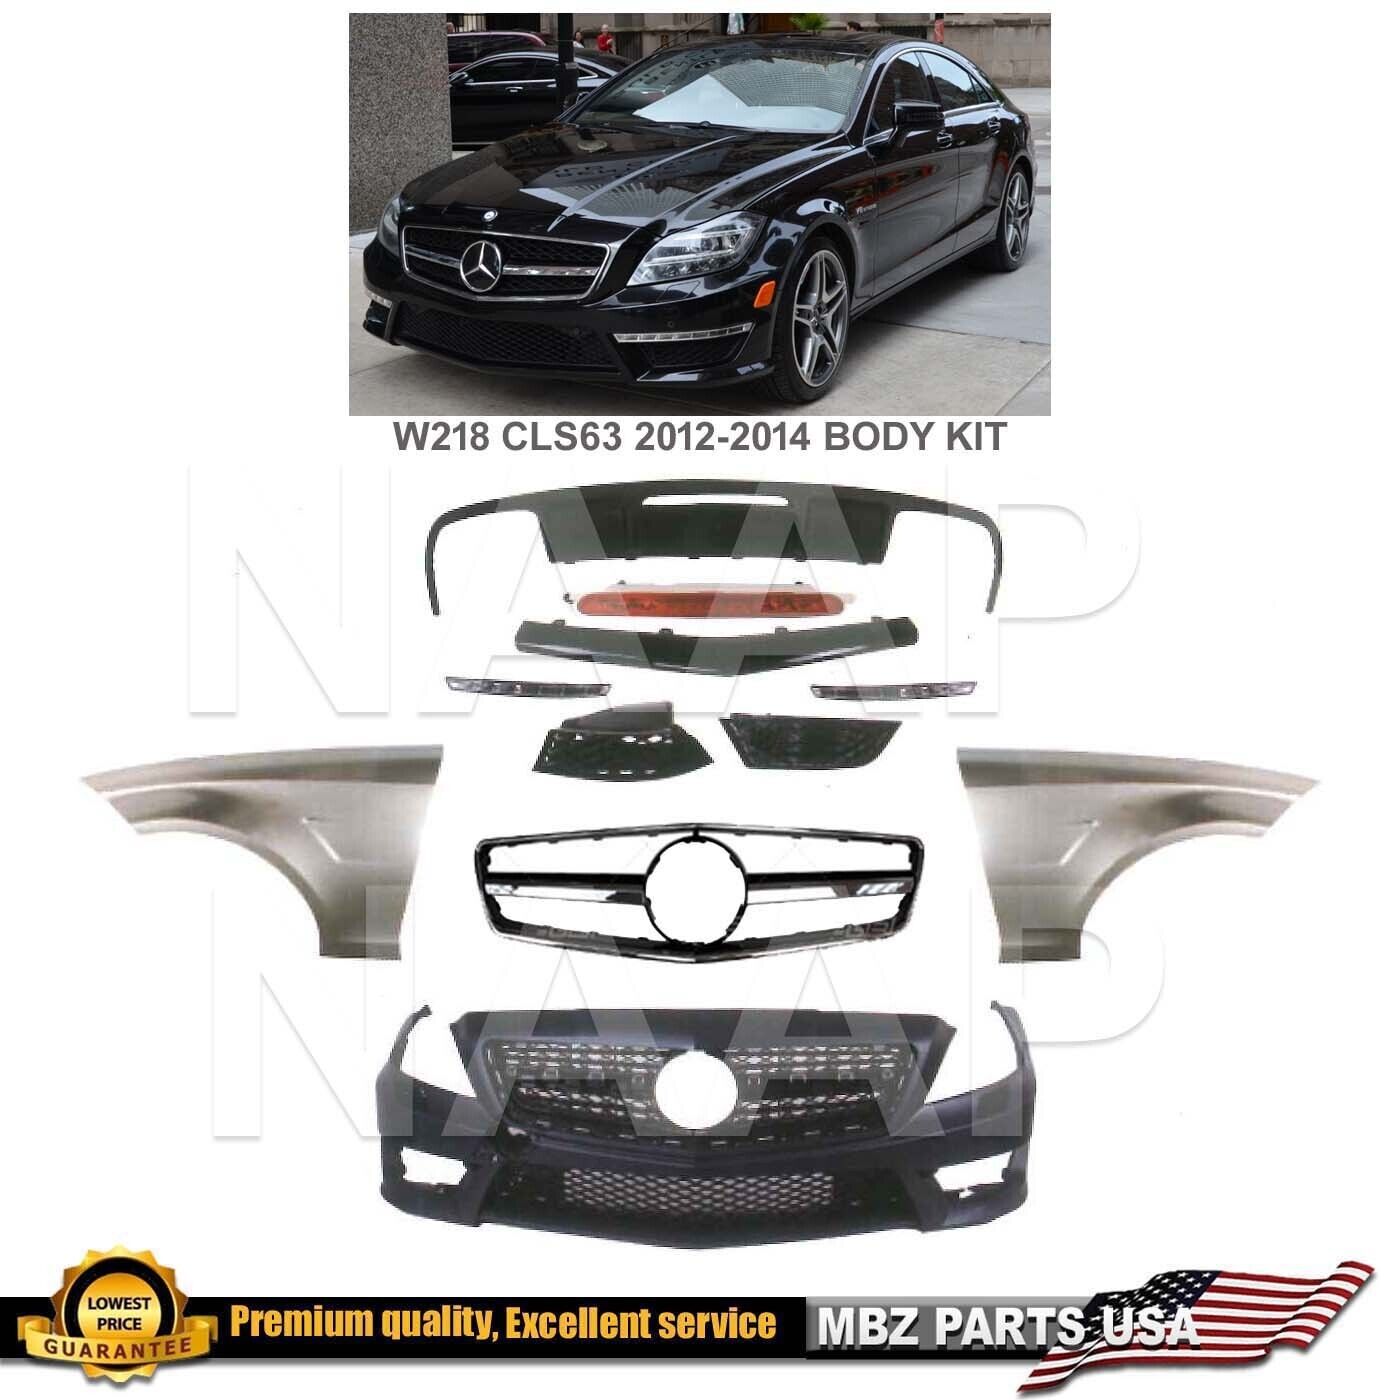 CLS63 AMG Body Kit Bumpers Grille Fenders Diffuser 2012 2013 2014 CLS550